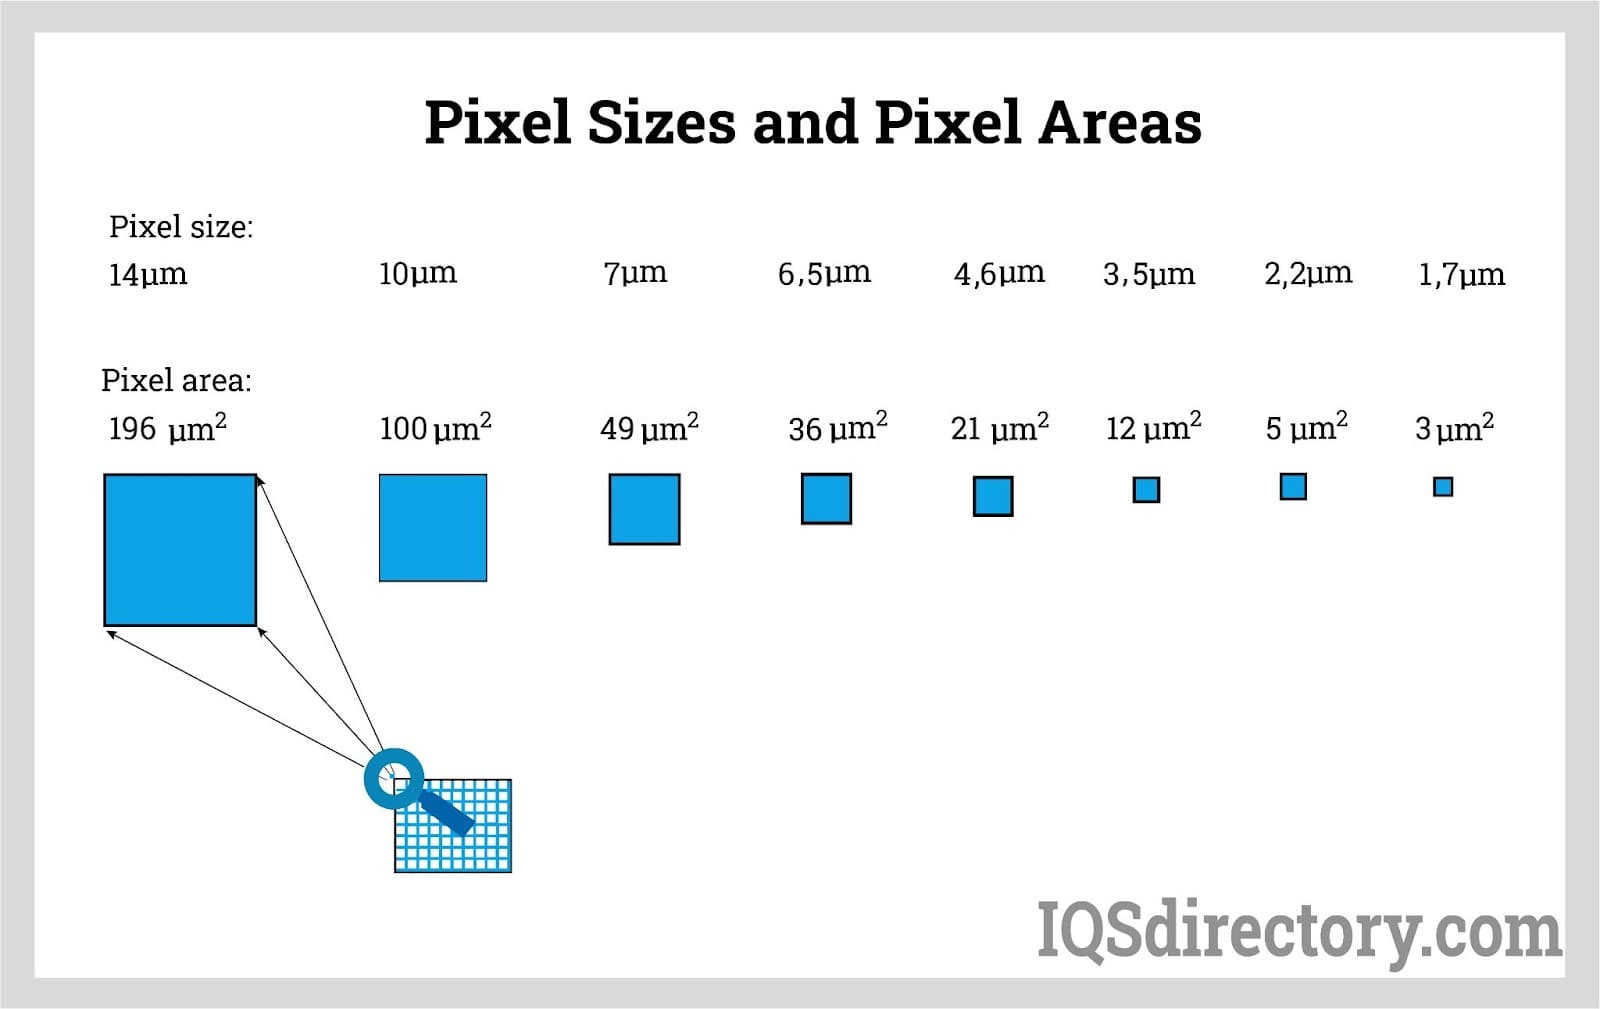 Pixel Sizes and Pixel Areas